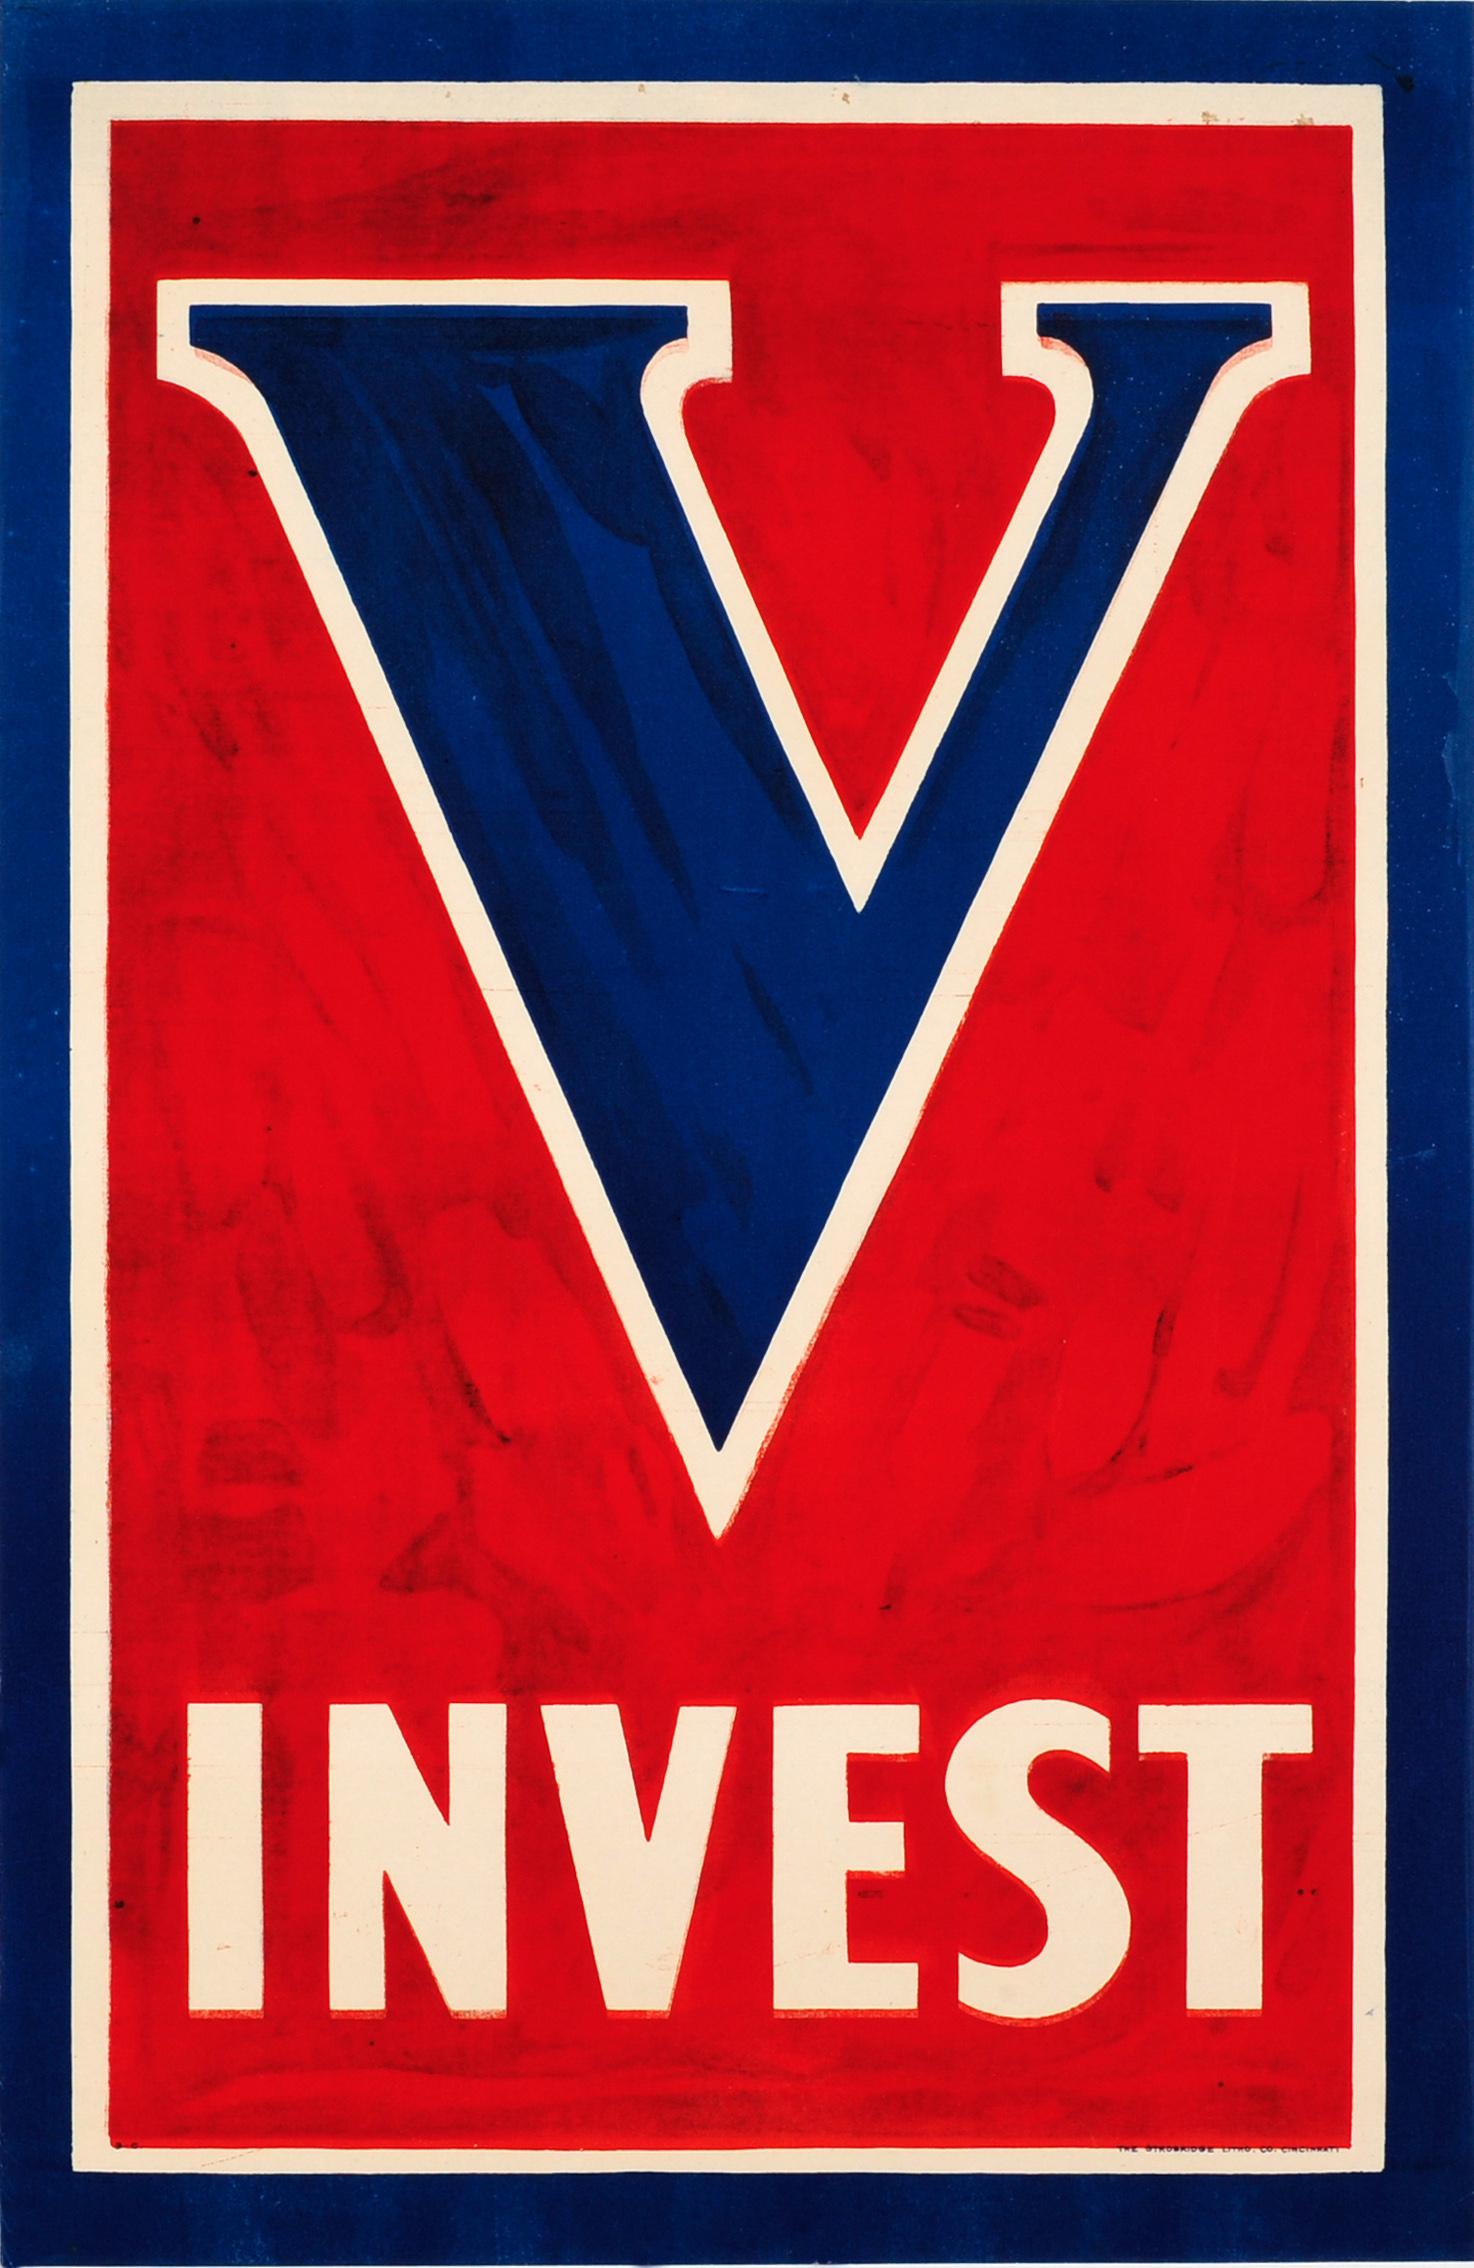 Unknown Print - Original Antique World War One Poster V Invest US Victory Bonds & Liberty Loans